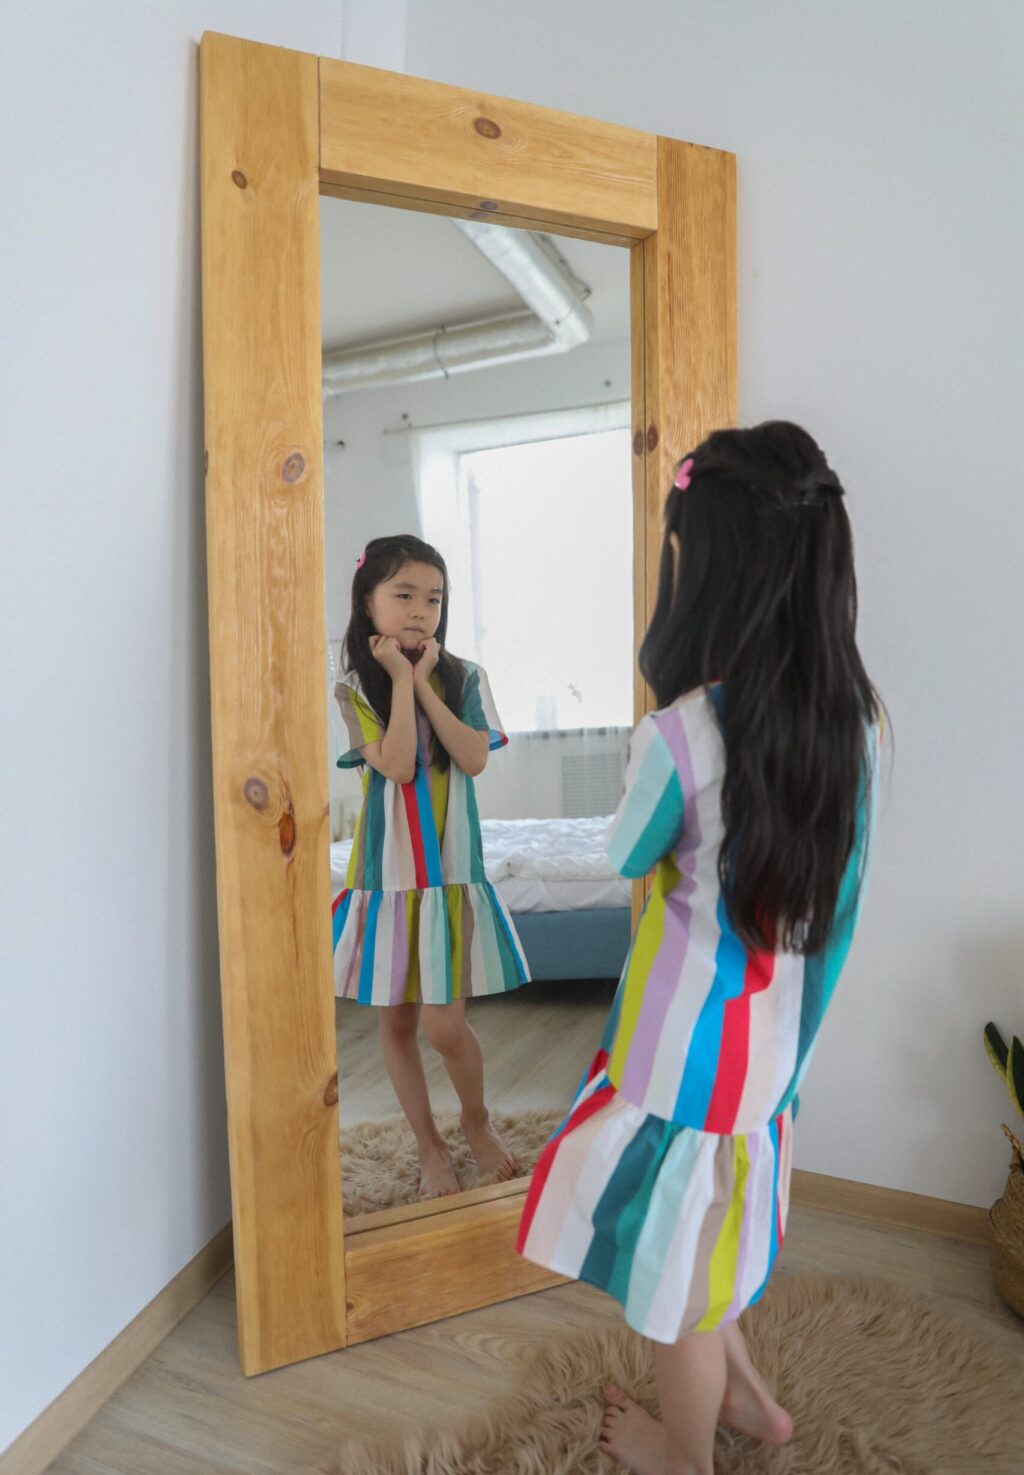 A child wearing a colorful dress with vertical stripes looking into a full length mirror with a wooden frame leaned against the wall. She poses with her hands curled into fists under her chin and her right knee bent inward.